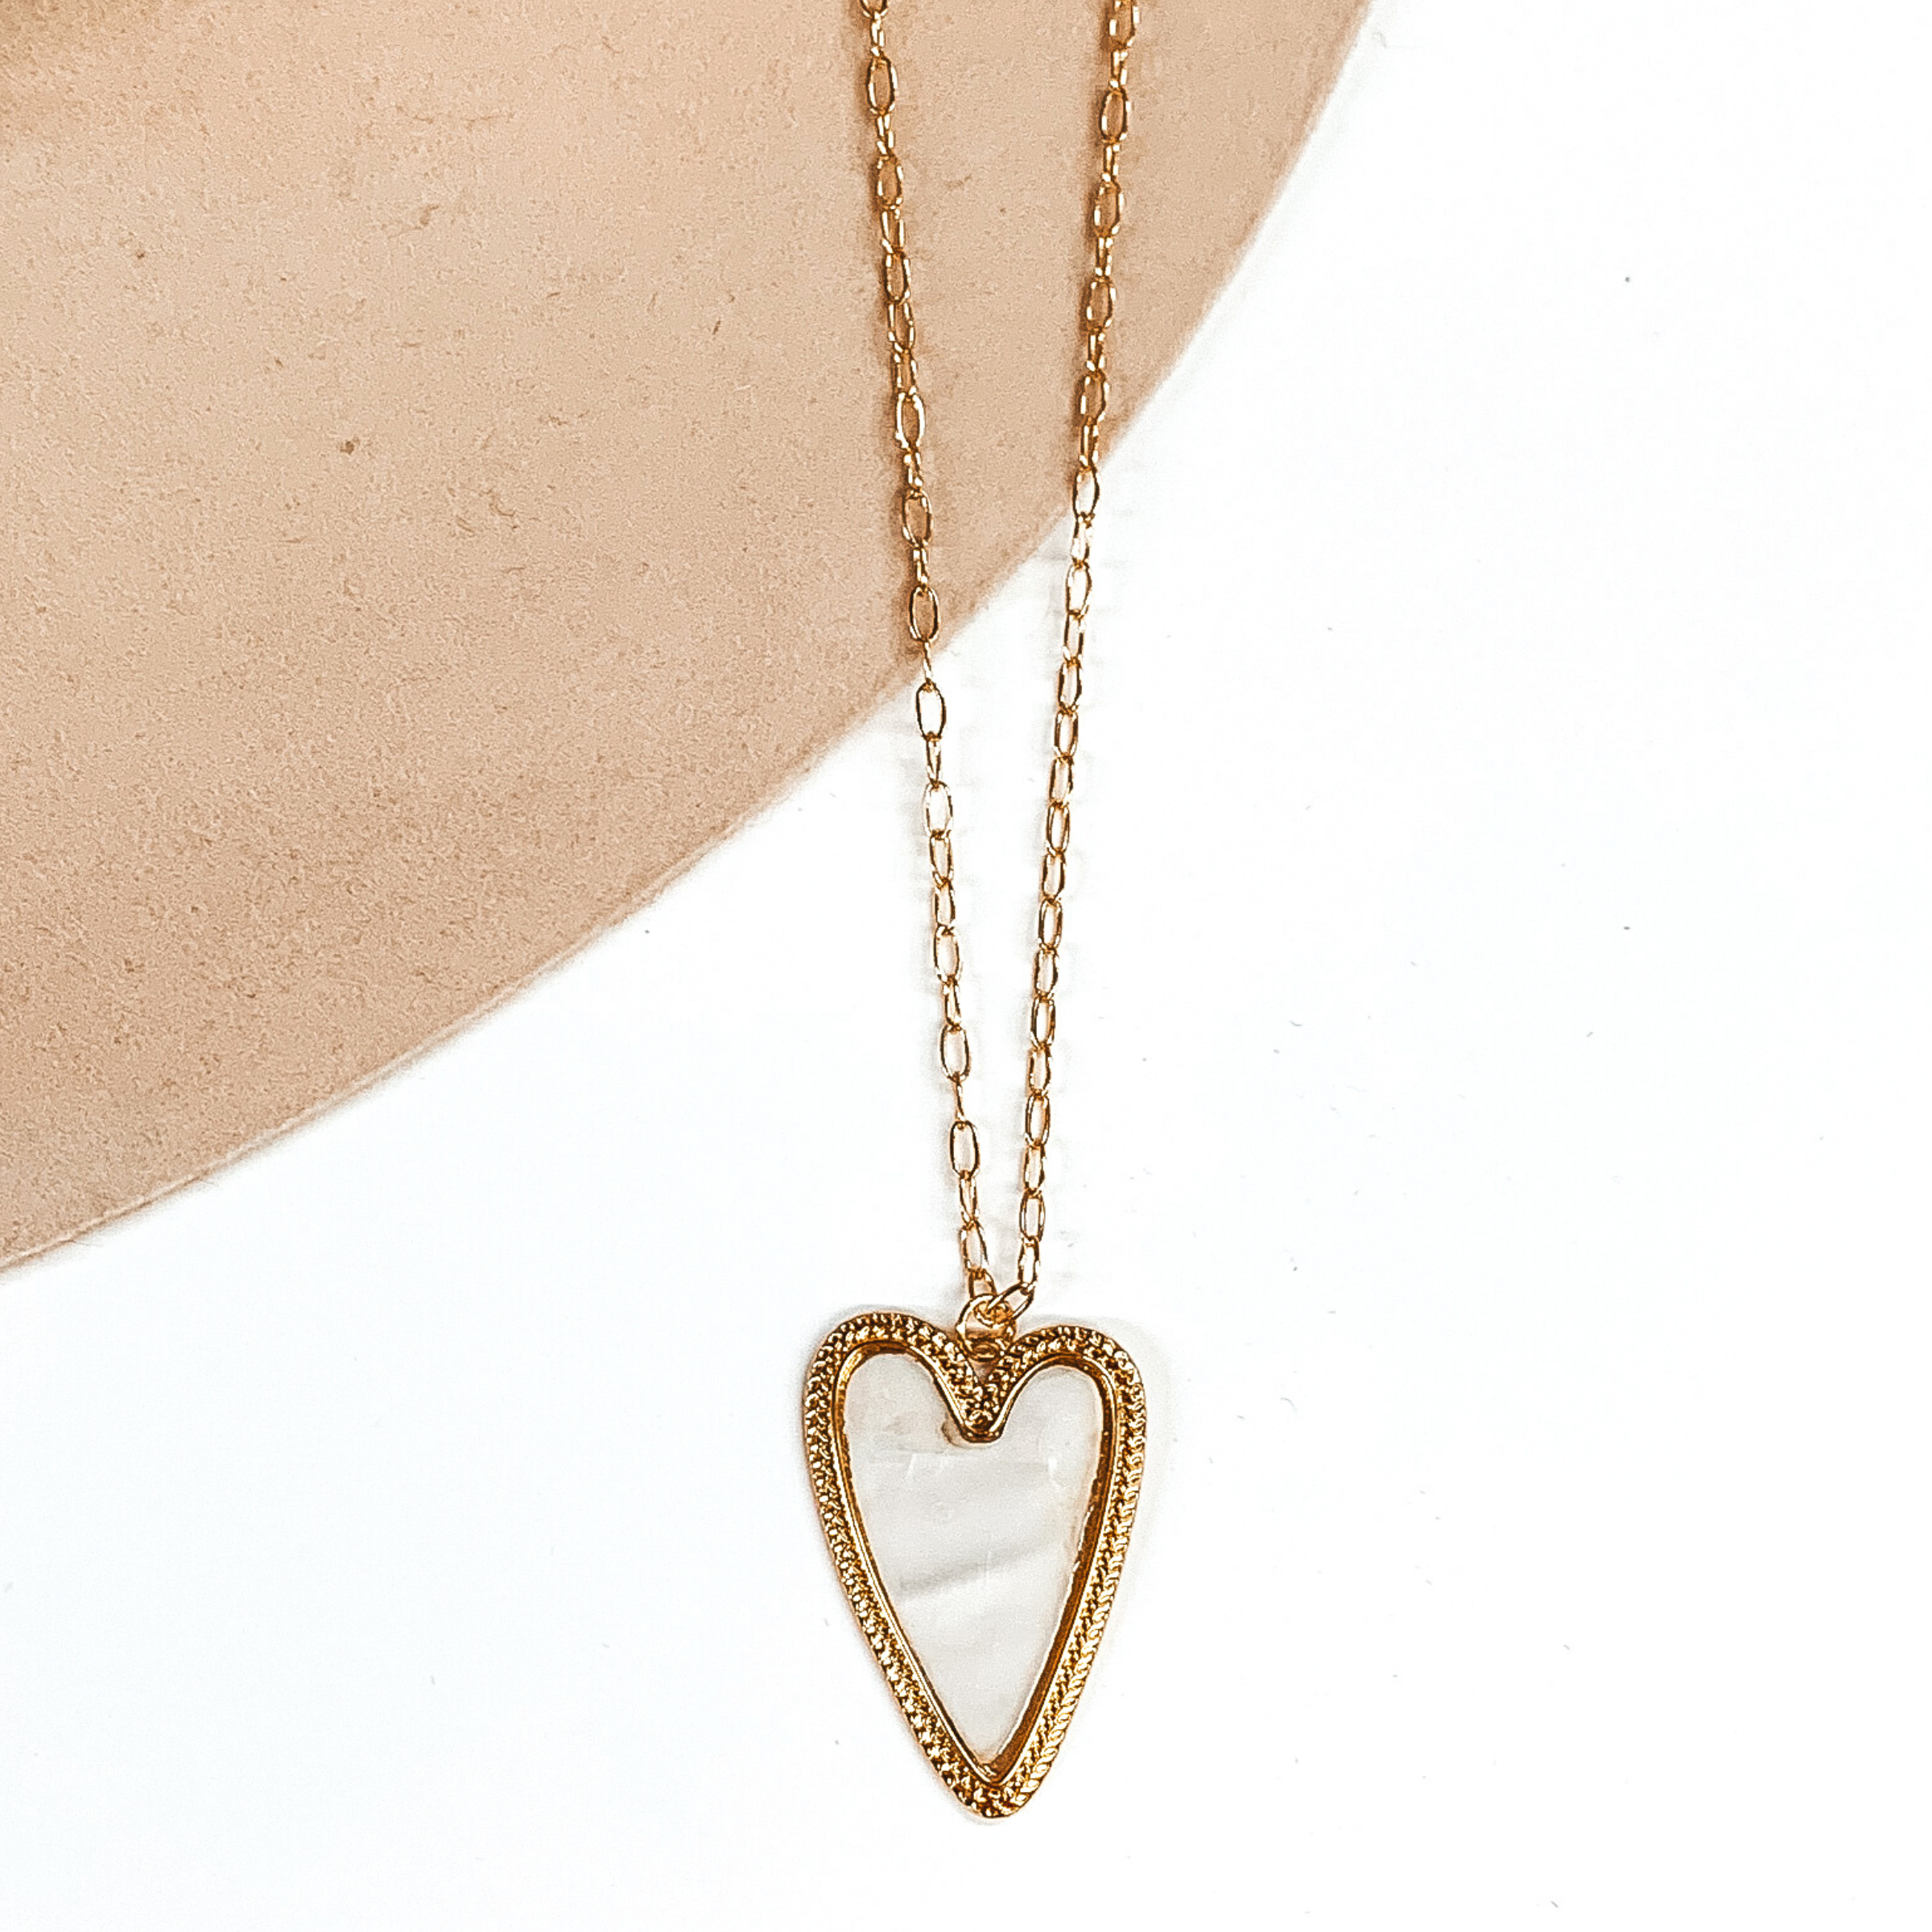 Thin gold chained necklace with heart pendant. The pendant is a gold, heart shaped pendant with a an ivory colored shell inlay. This necklace is pictured on a white and beige background. 